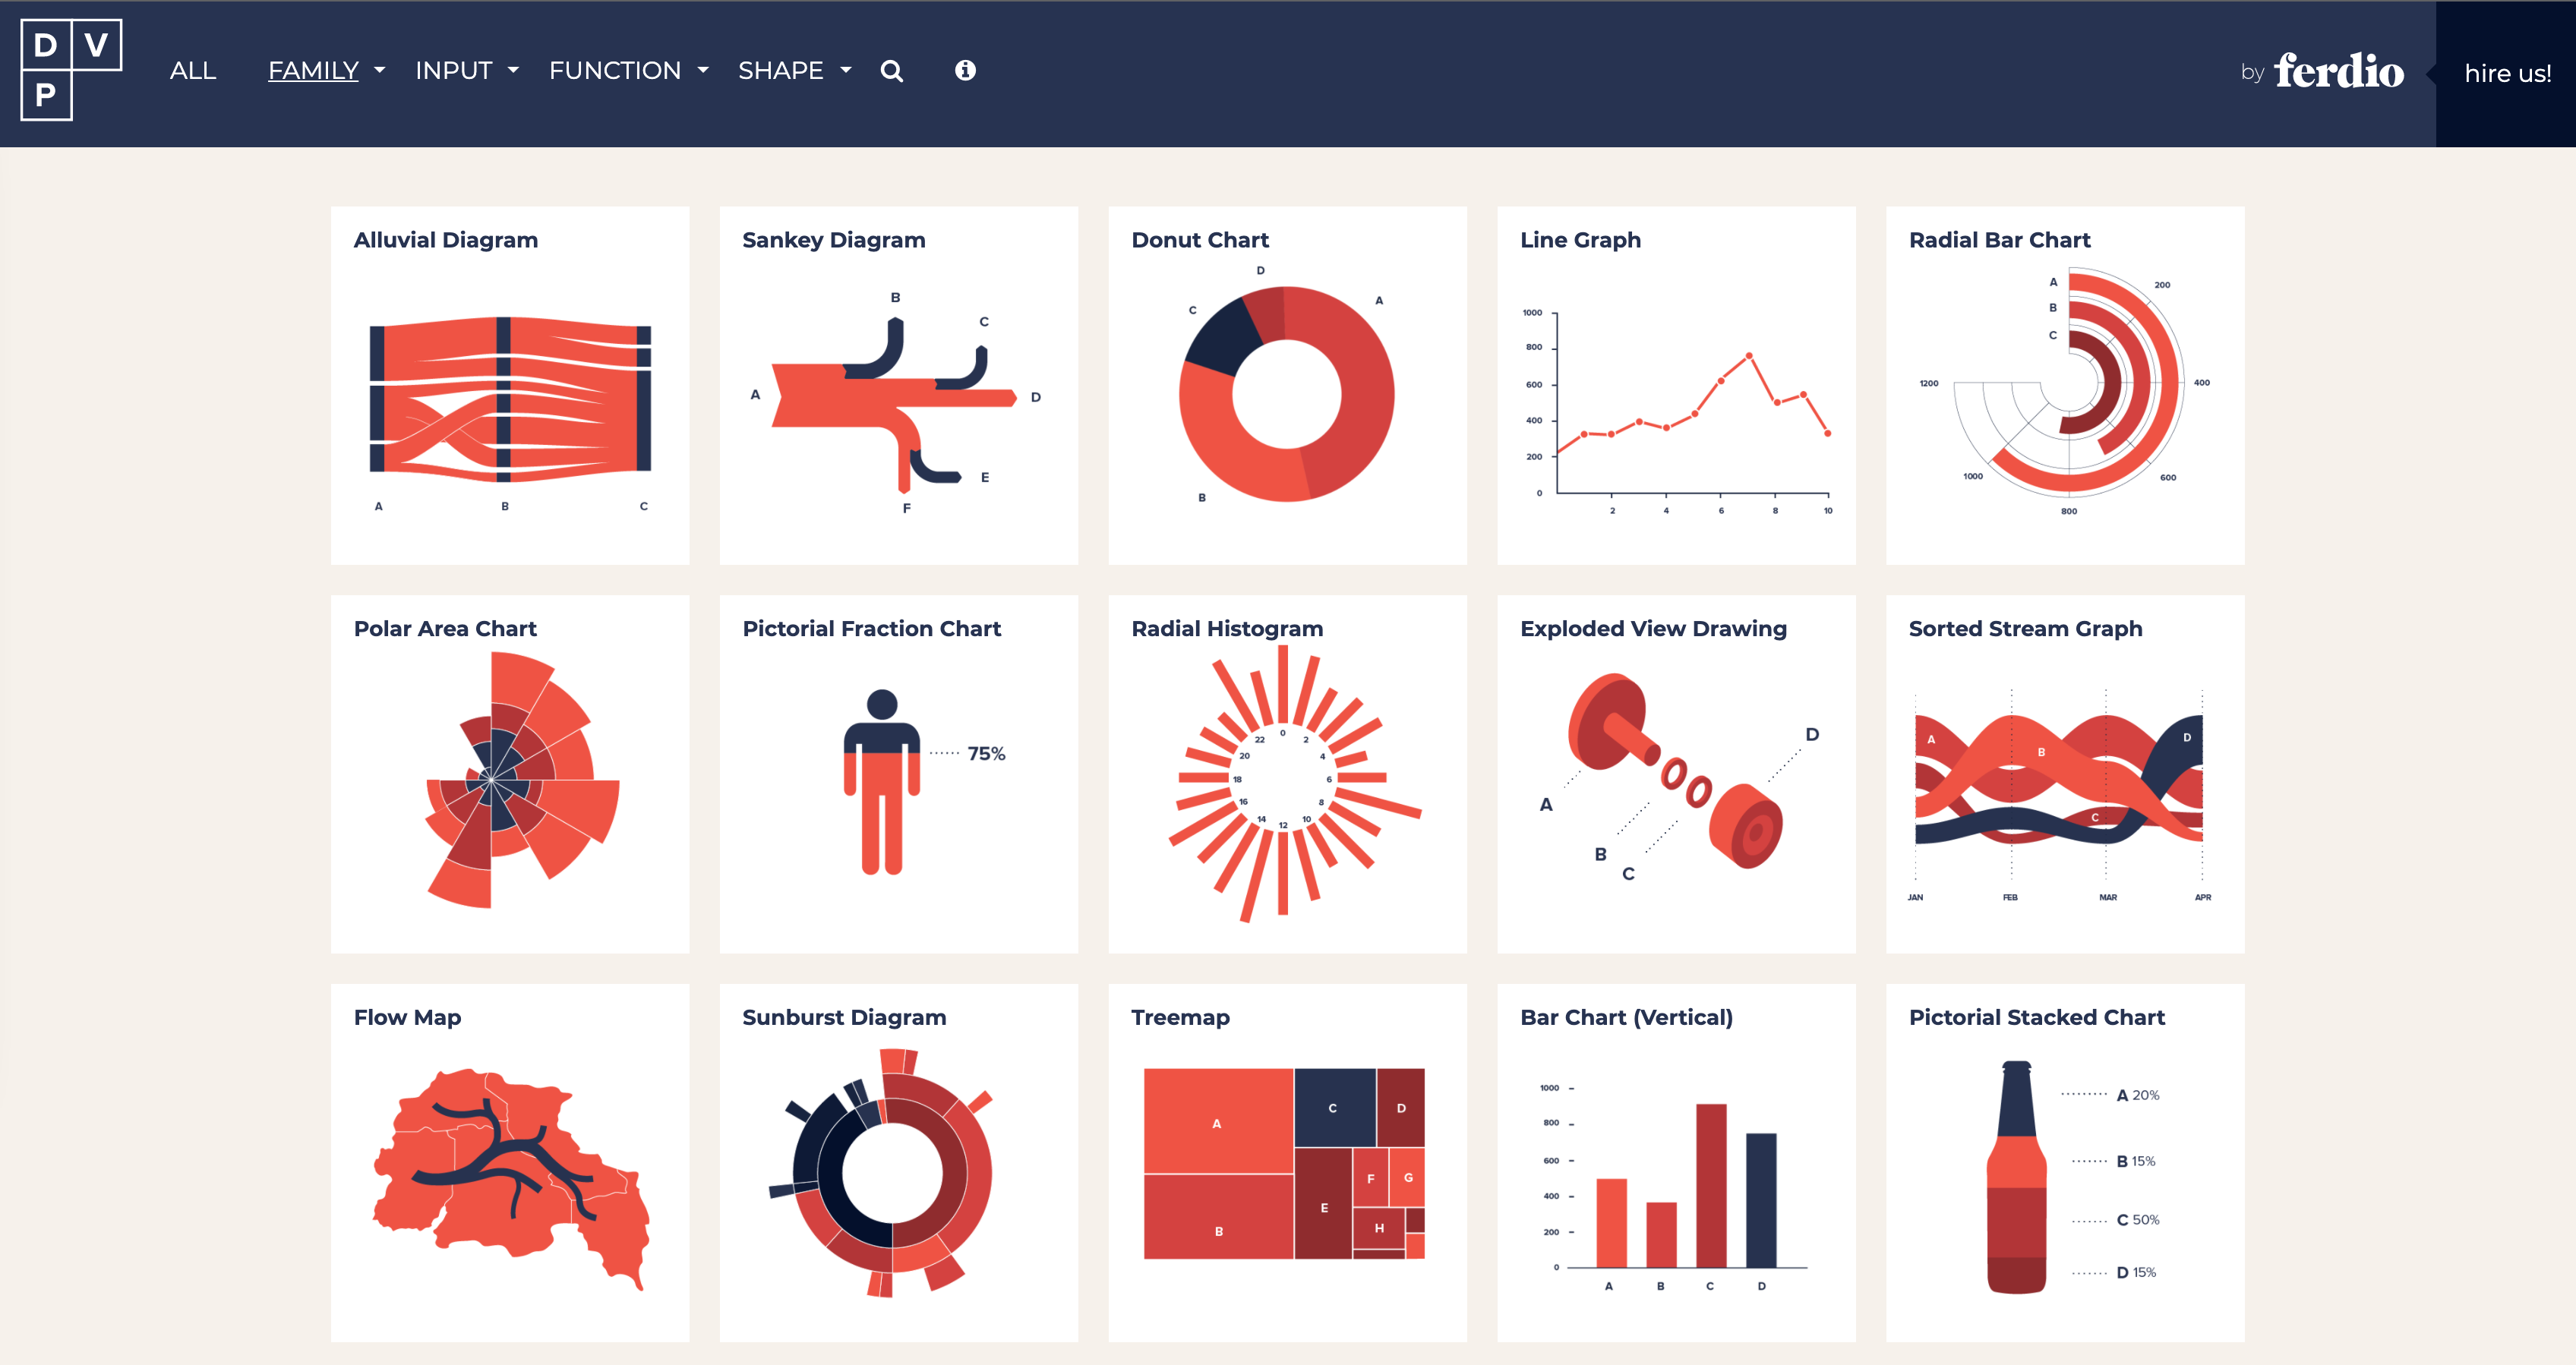 Screenshot from the Data Viz Project website showing an array of different data visualizations.